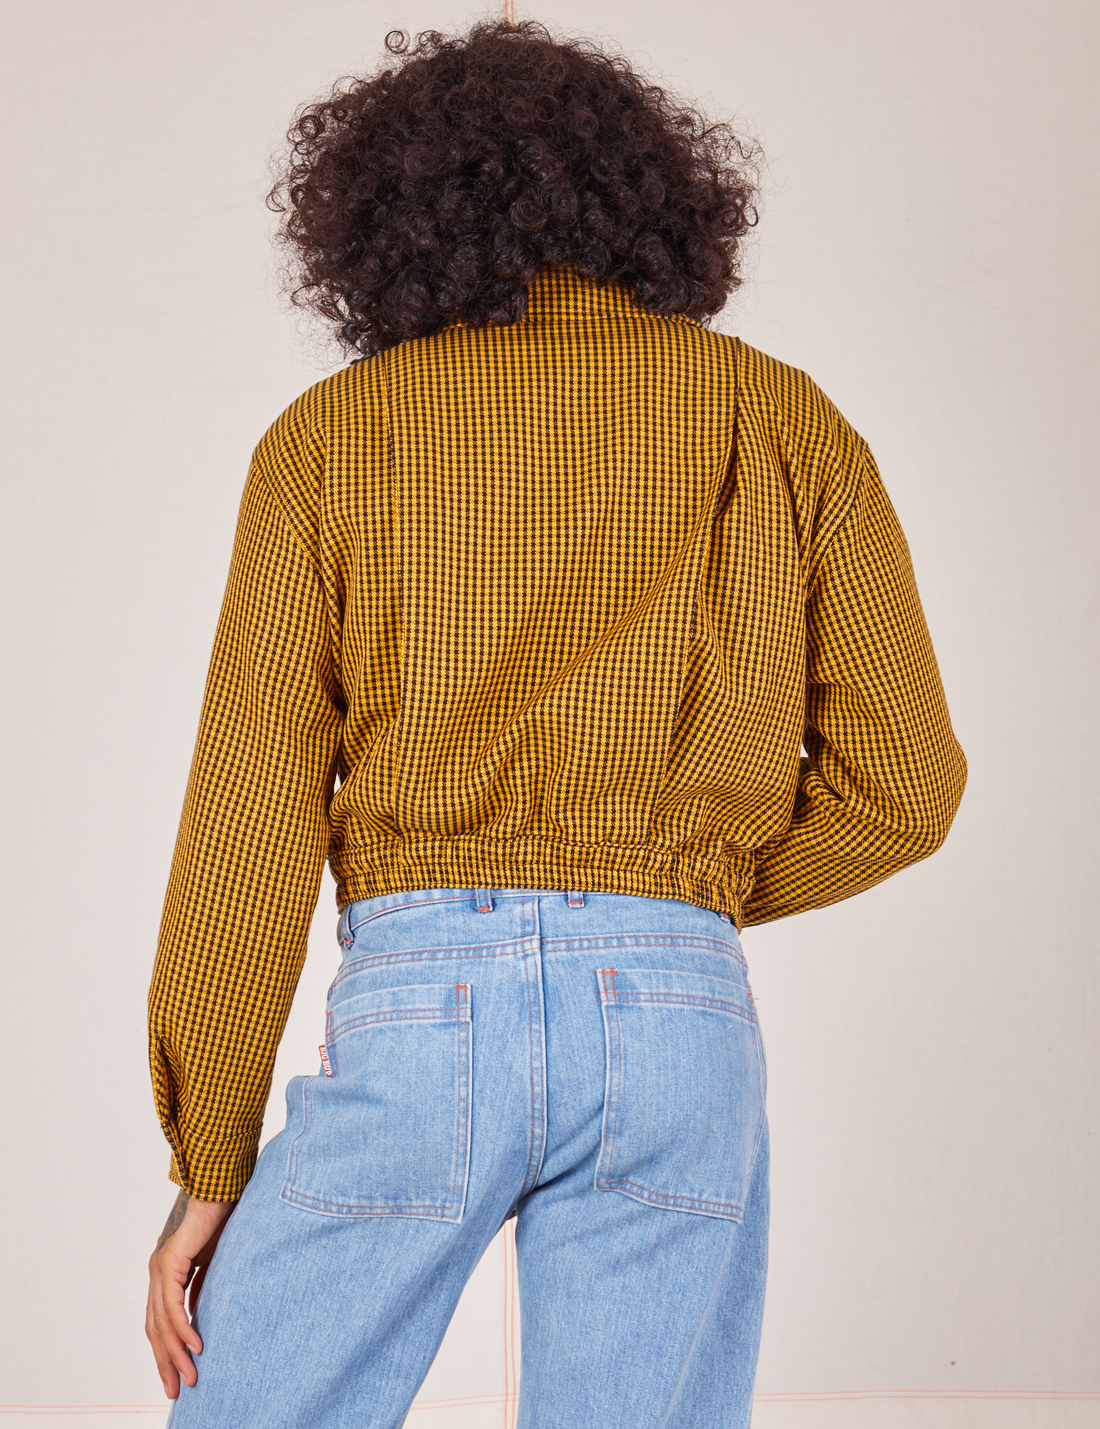 Back view of Ricky Jacket in Checker Yellow worn by Jesse